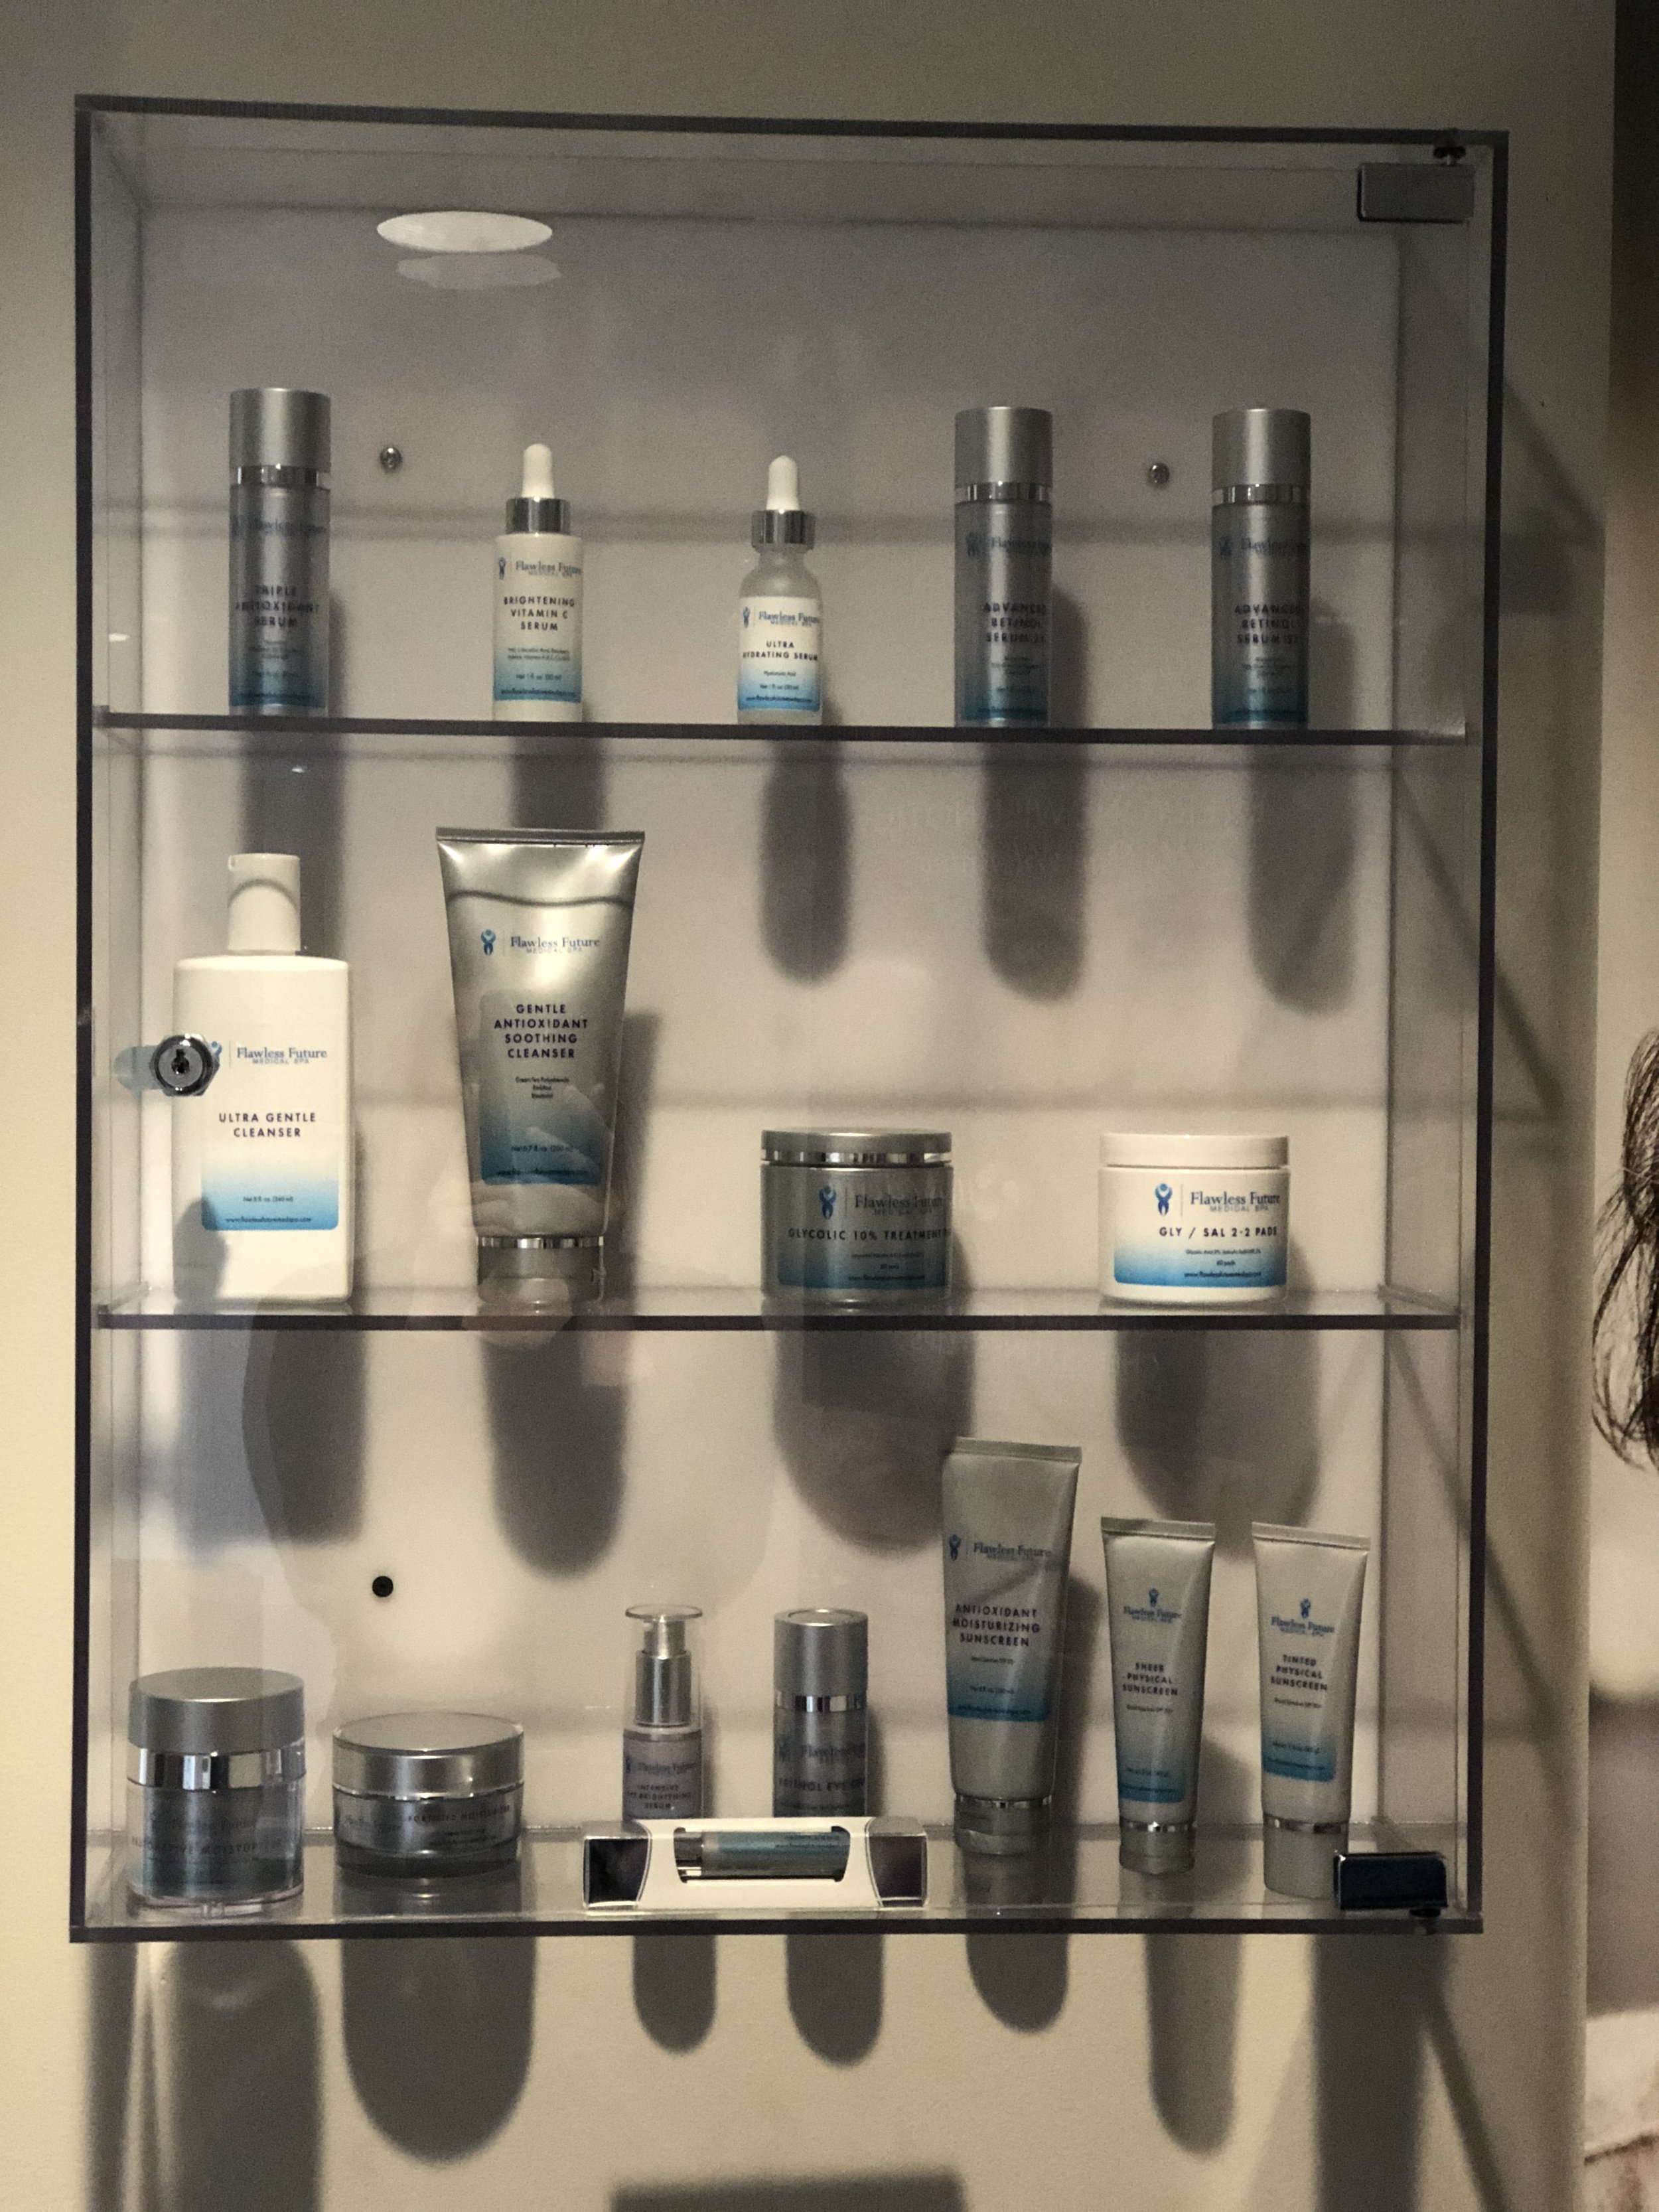 Flawless-Future-Med-Spa-Skin-Care-Products-Cabinet-Scranton.JPG